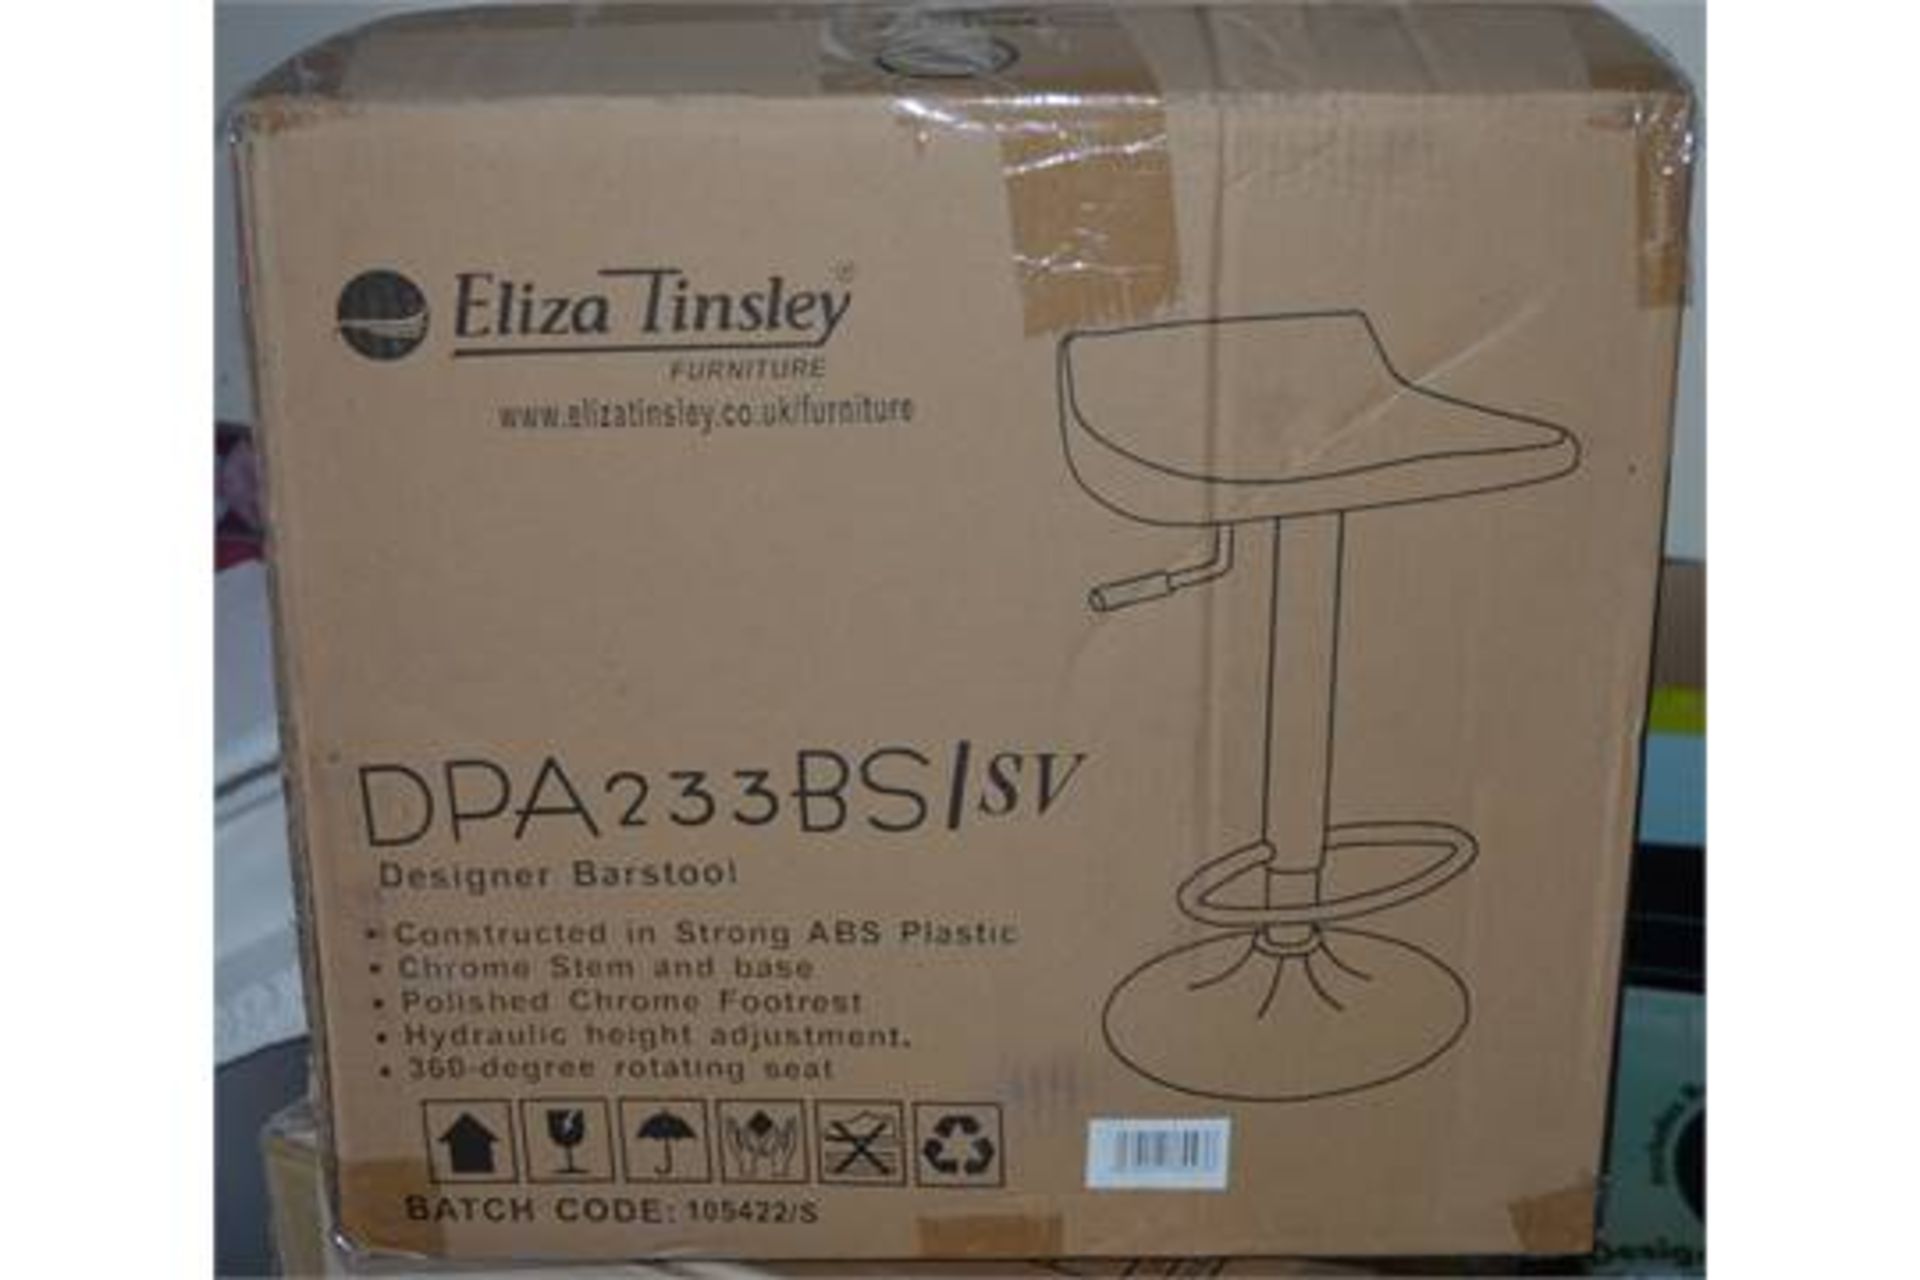 1 x Eliza Tinsley Designer Bar Stool - SILVER - Constructed in Strong ABS Plastic With Chrome Base - Image 2 of 2